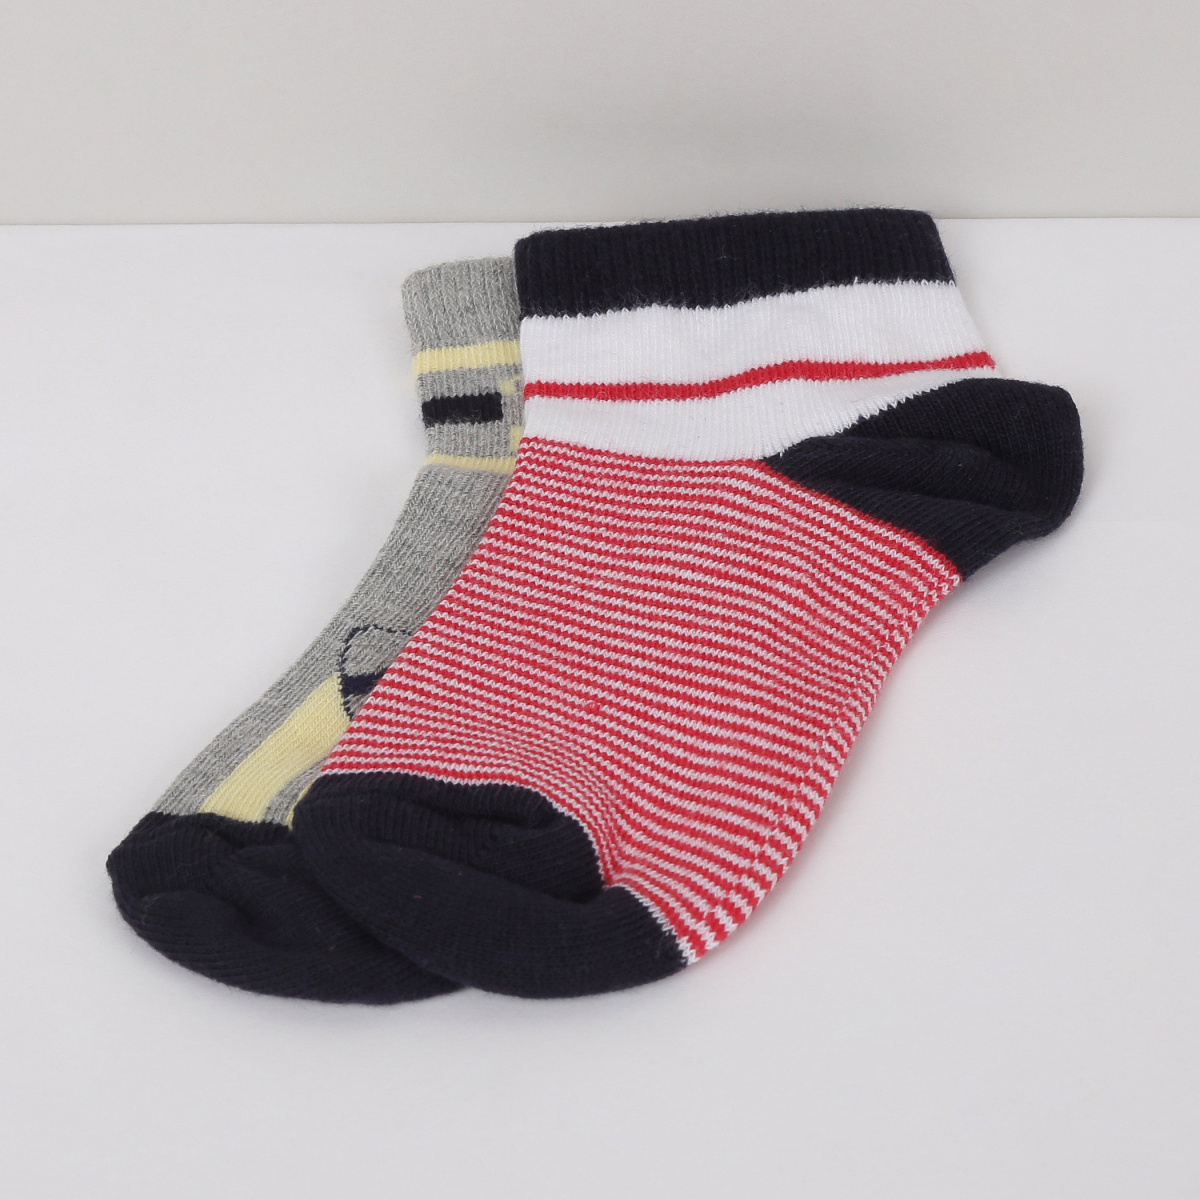 MAX Patterned Socks - Pack of 2